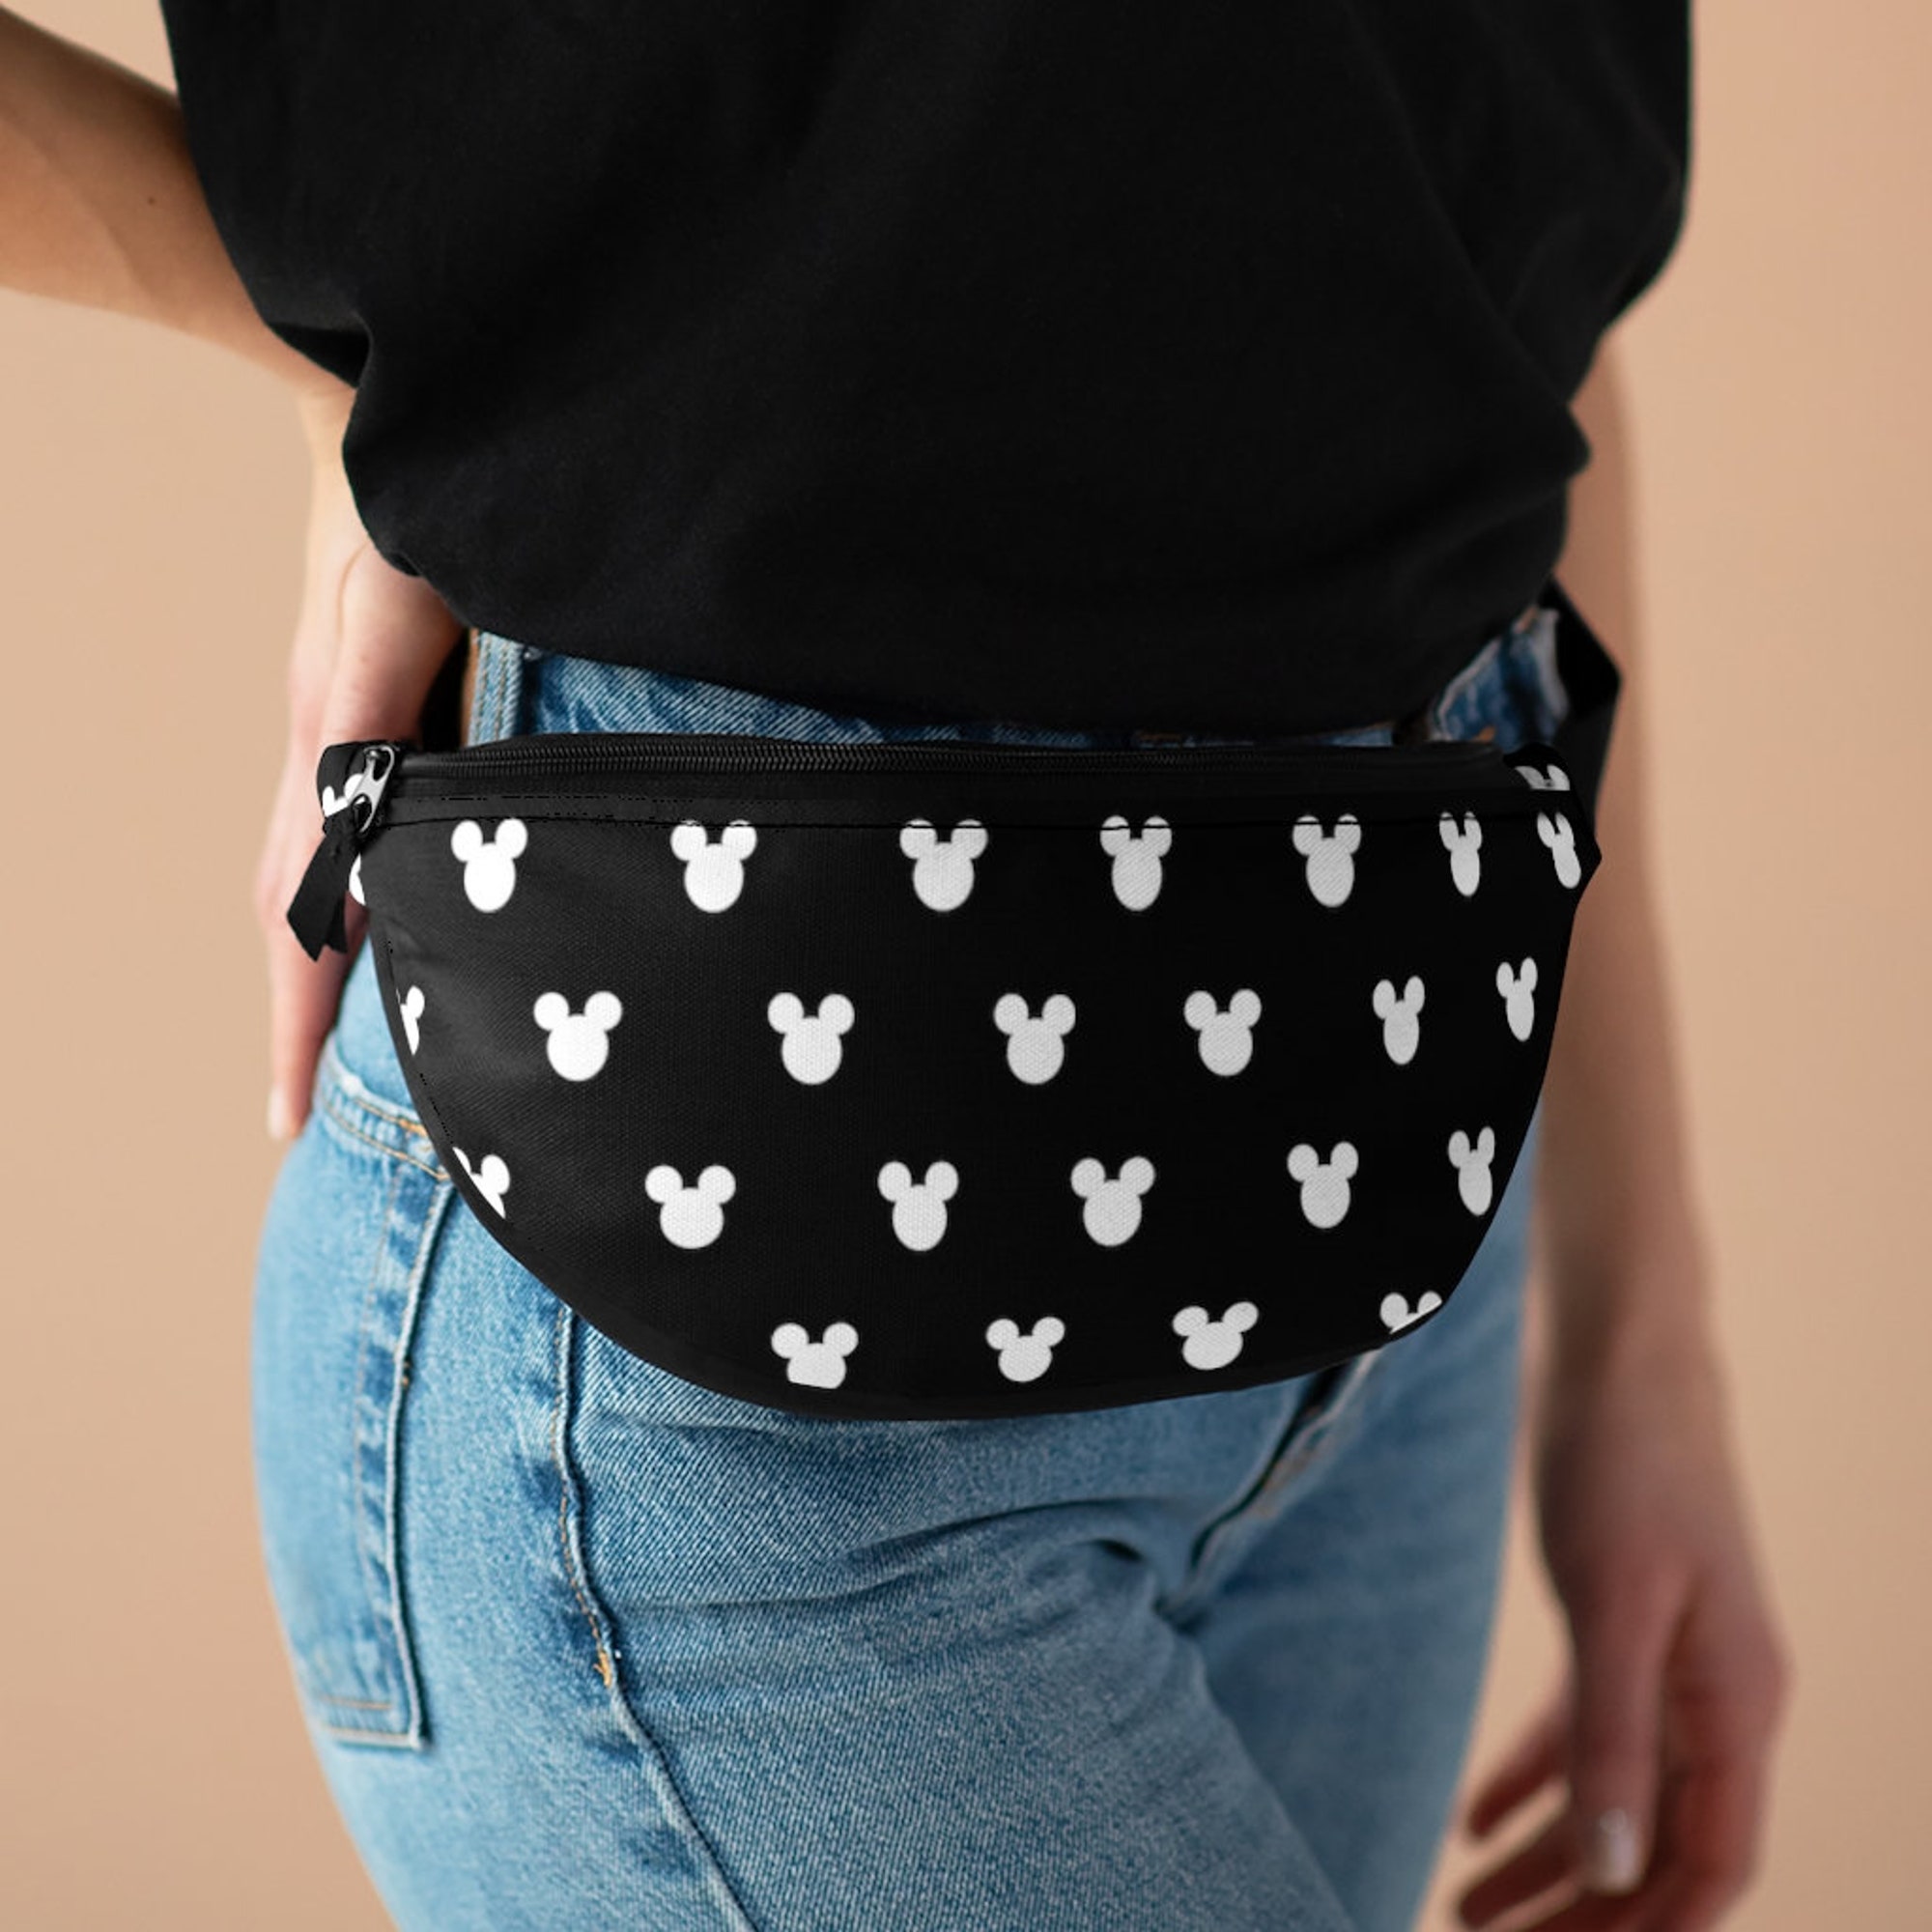 Discover Disney fanny pack, Mickey mouse shape design